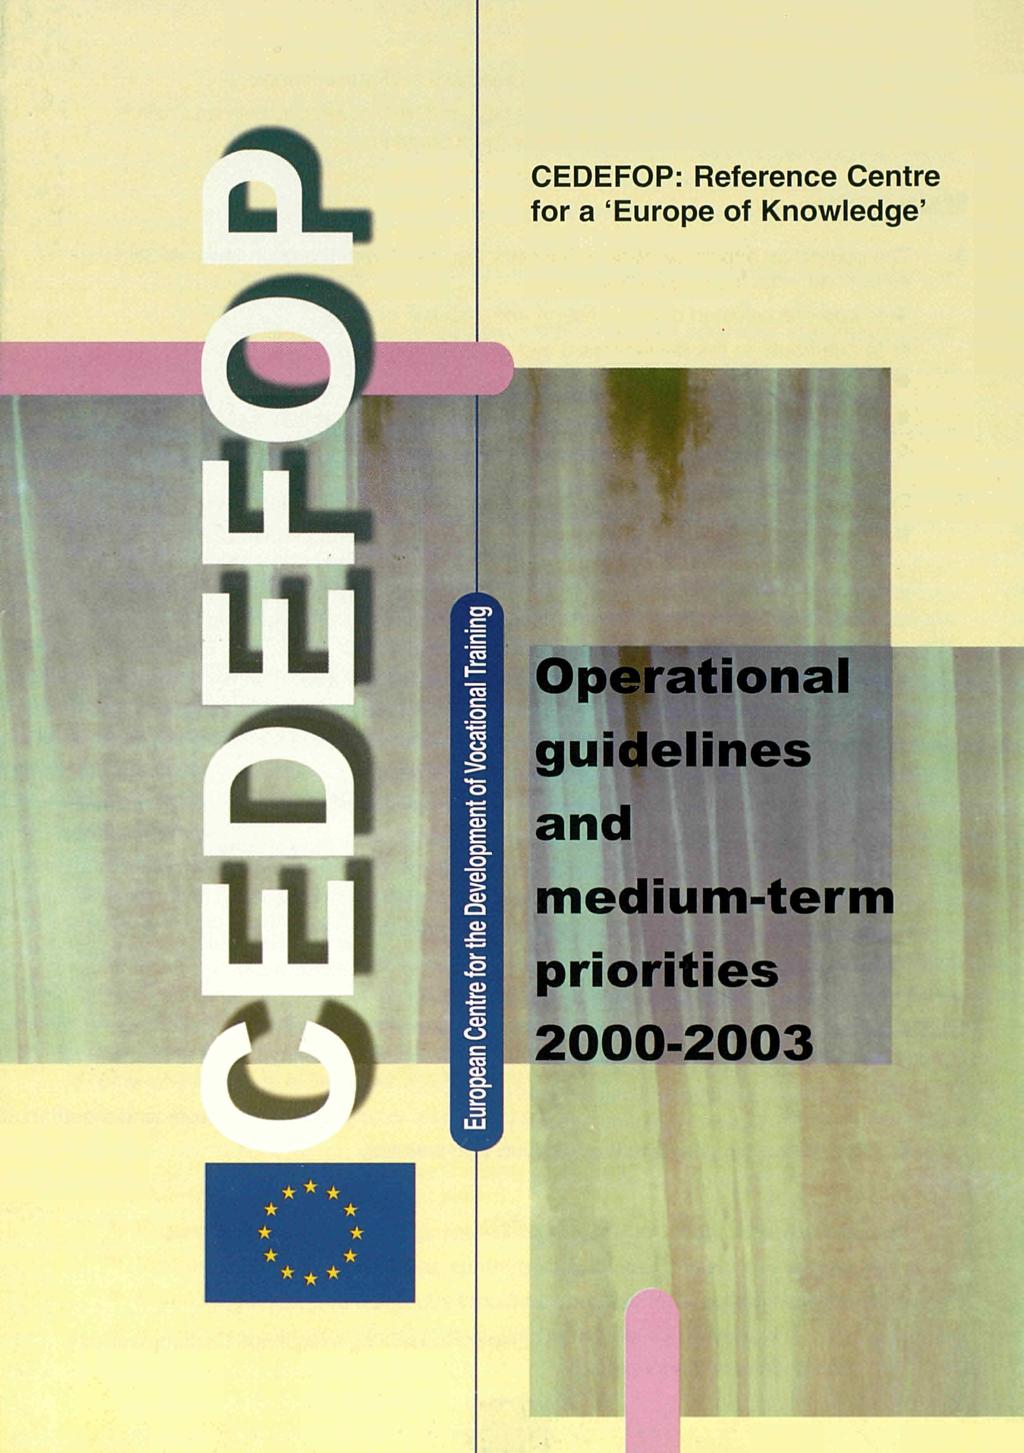 CEDEFOP: Reference Centre for a 'Europe of Knowledge'